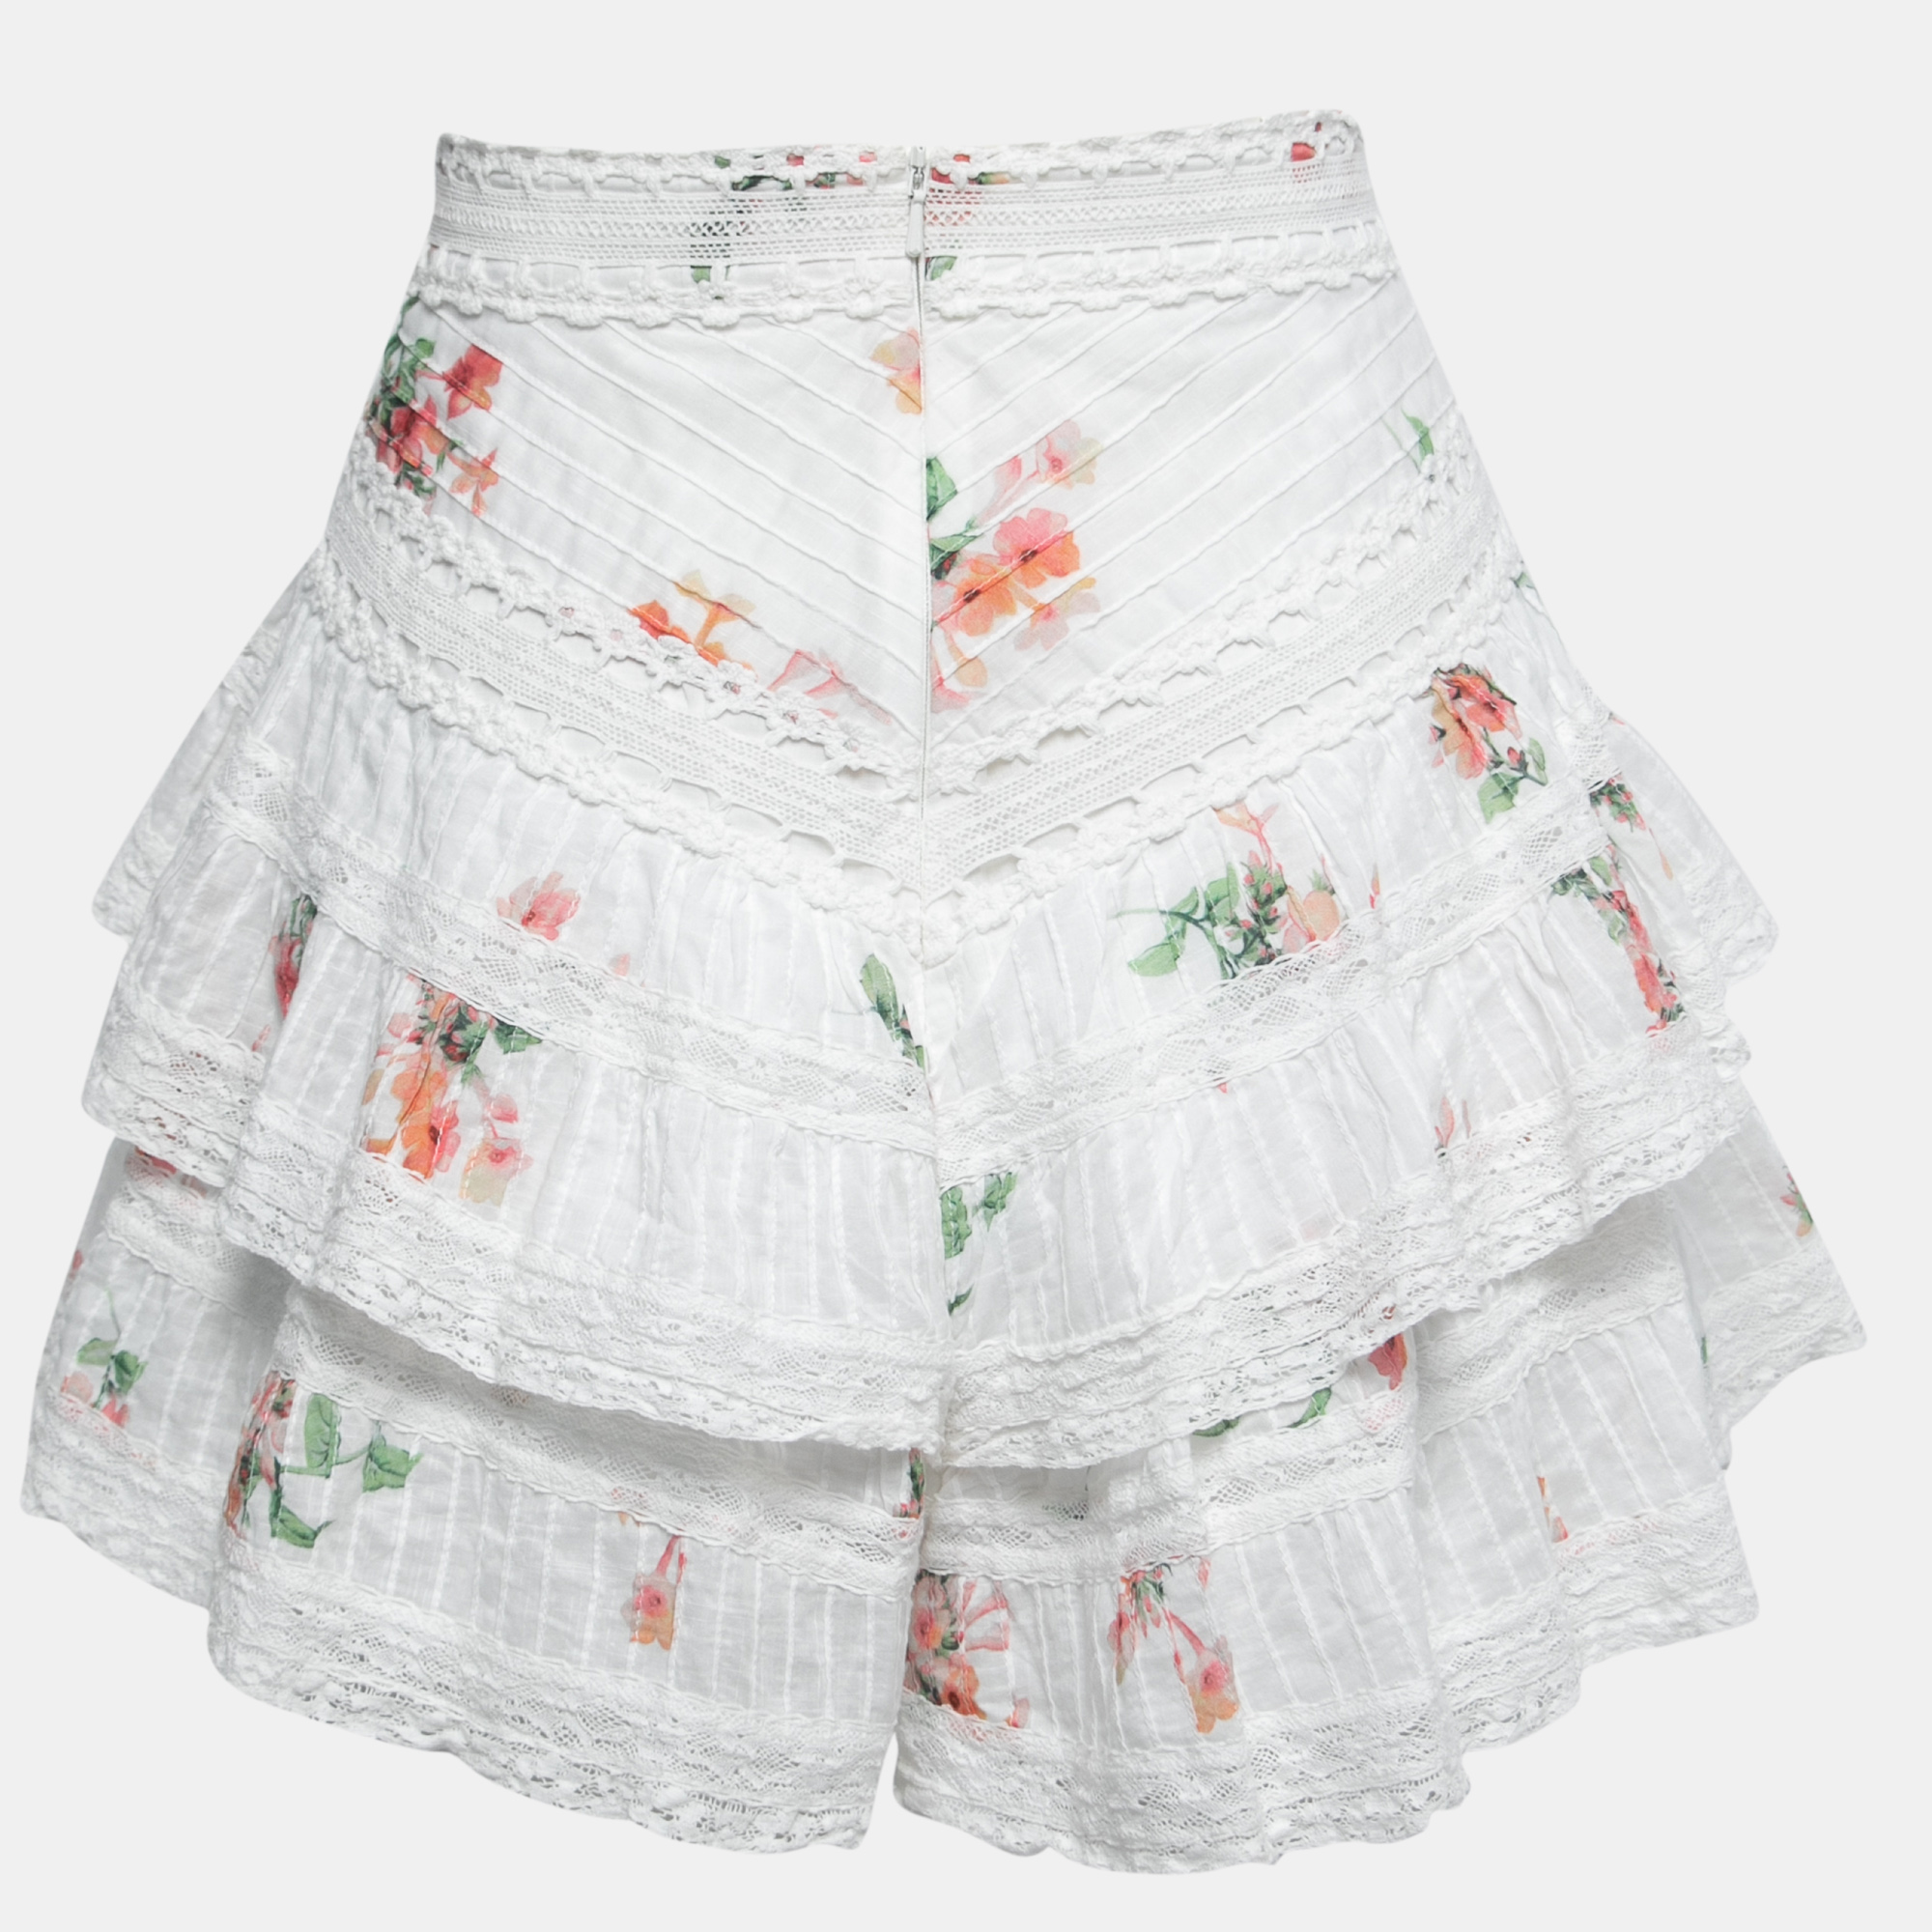 

Zimmermann White Floral Printed Cotton Lace Trimmed Shorts